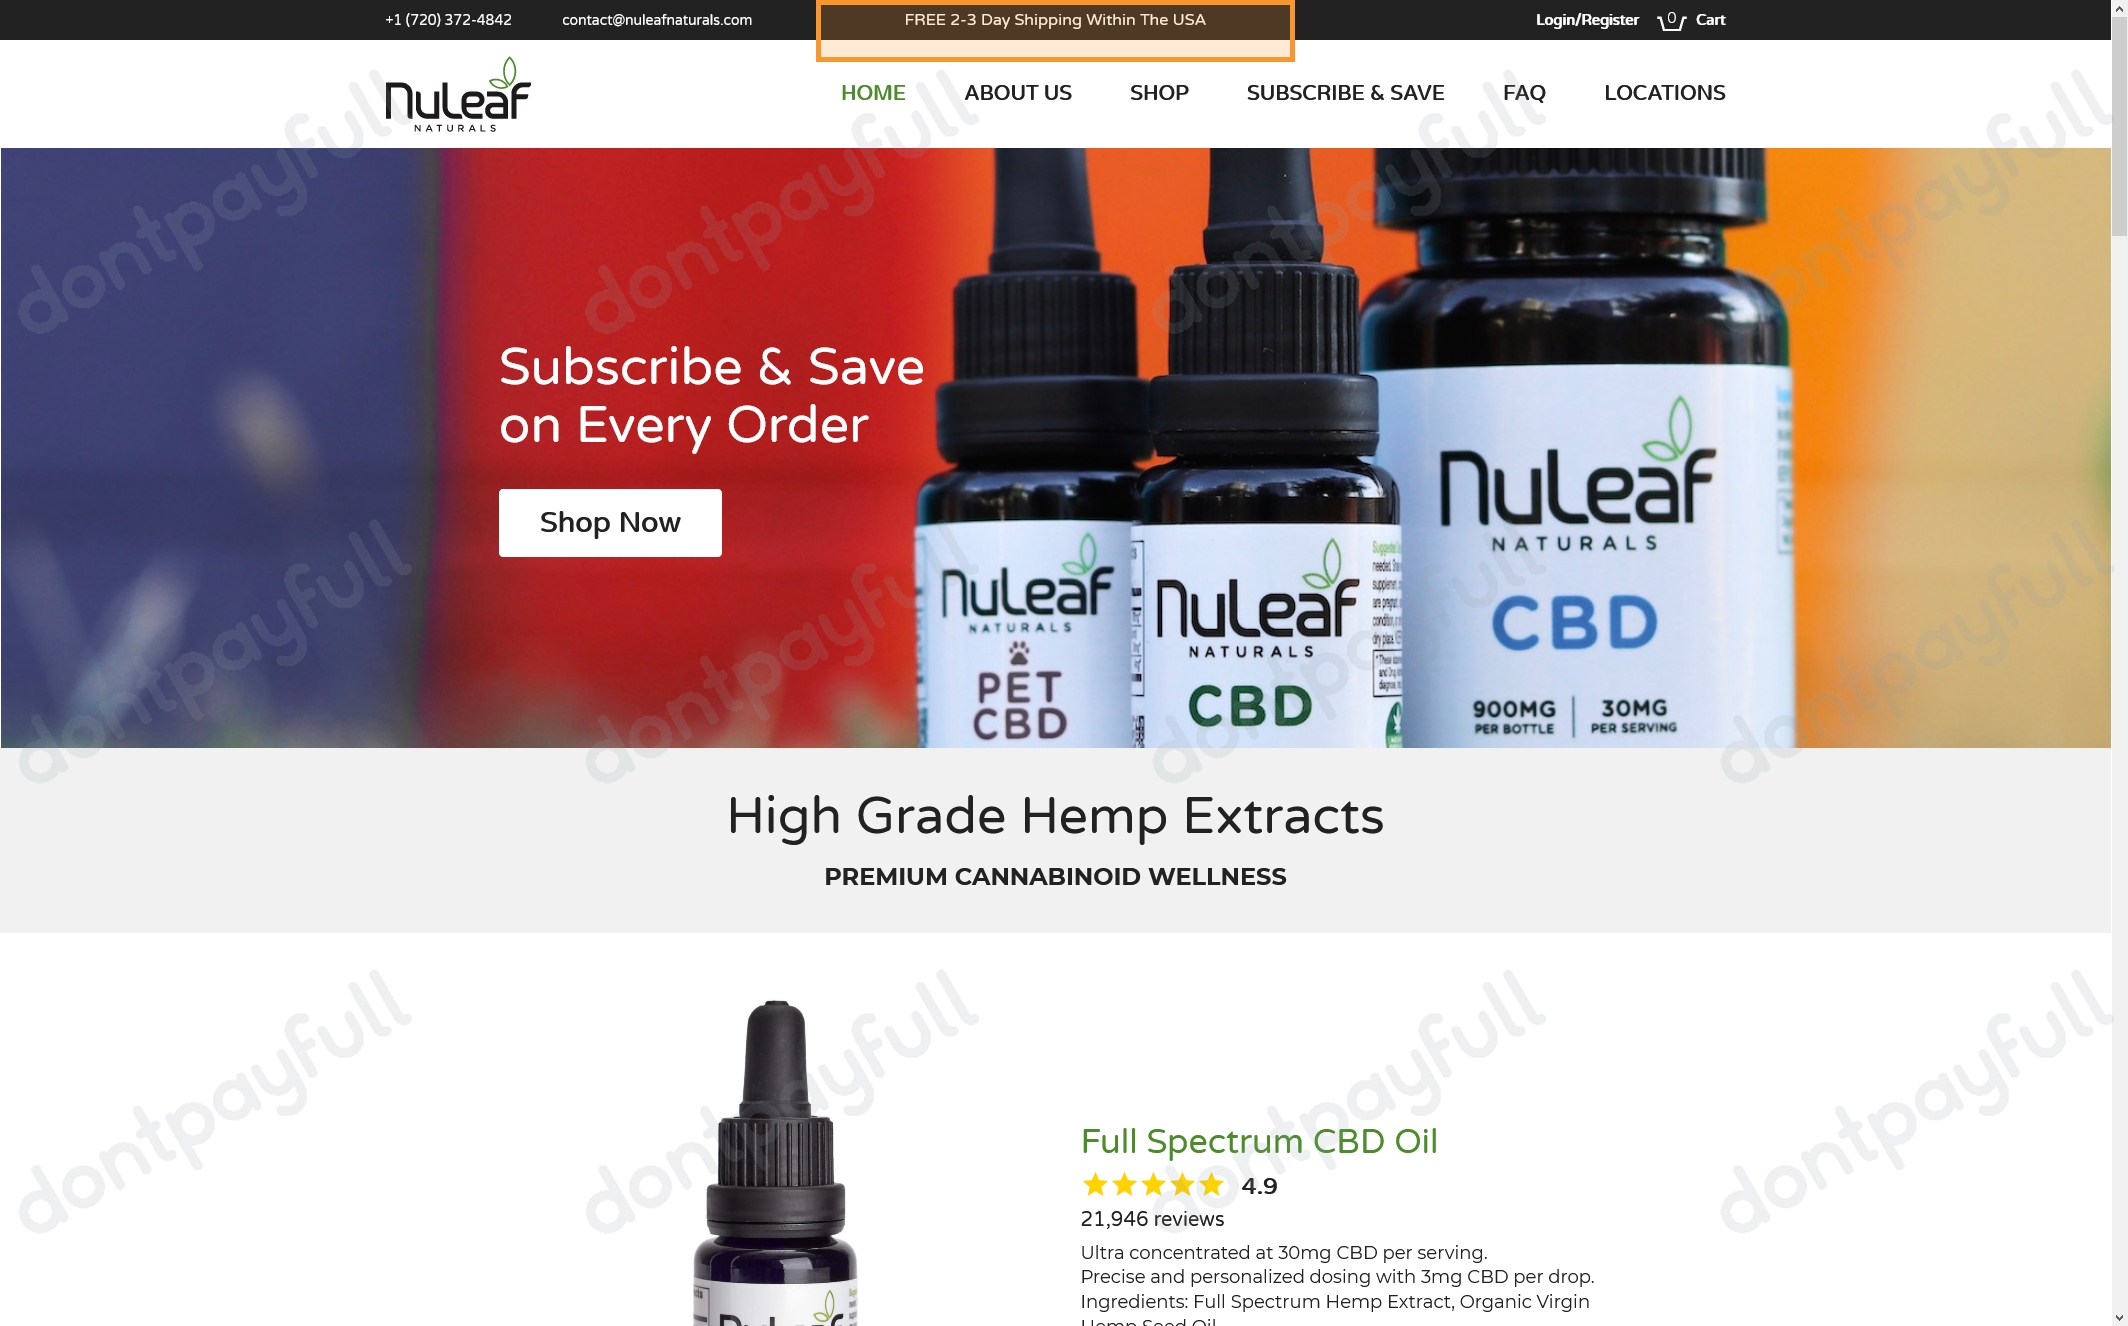 25% off NuLeaf Coupon & Review - CBDNerds October 2021